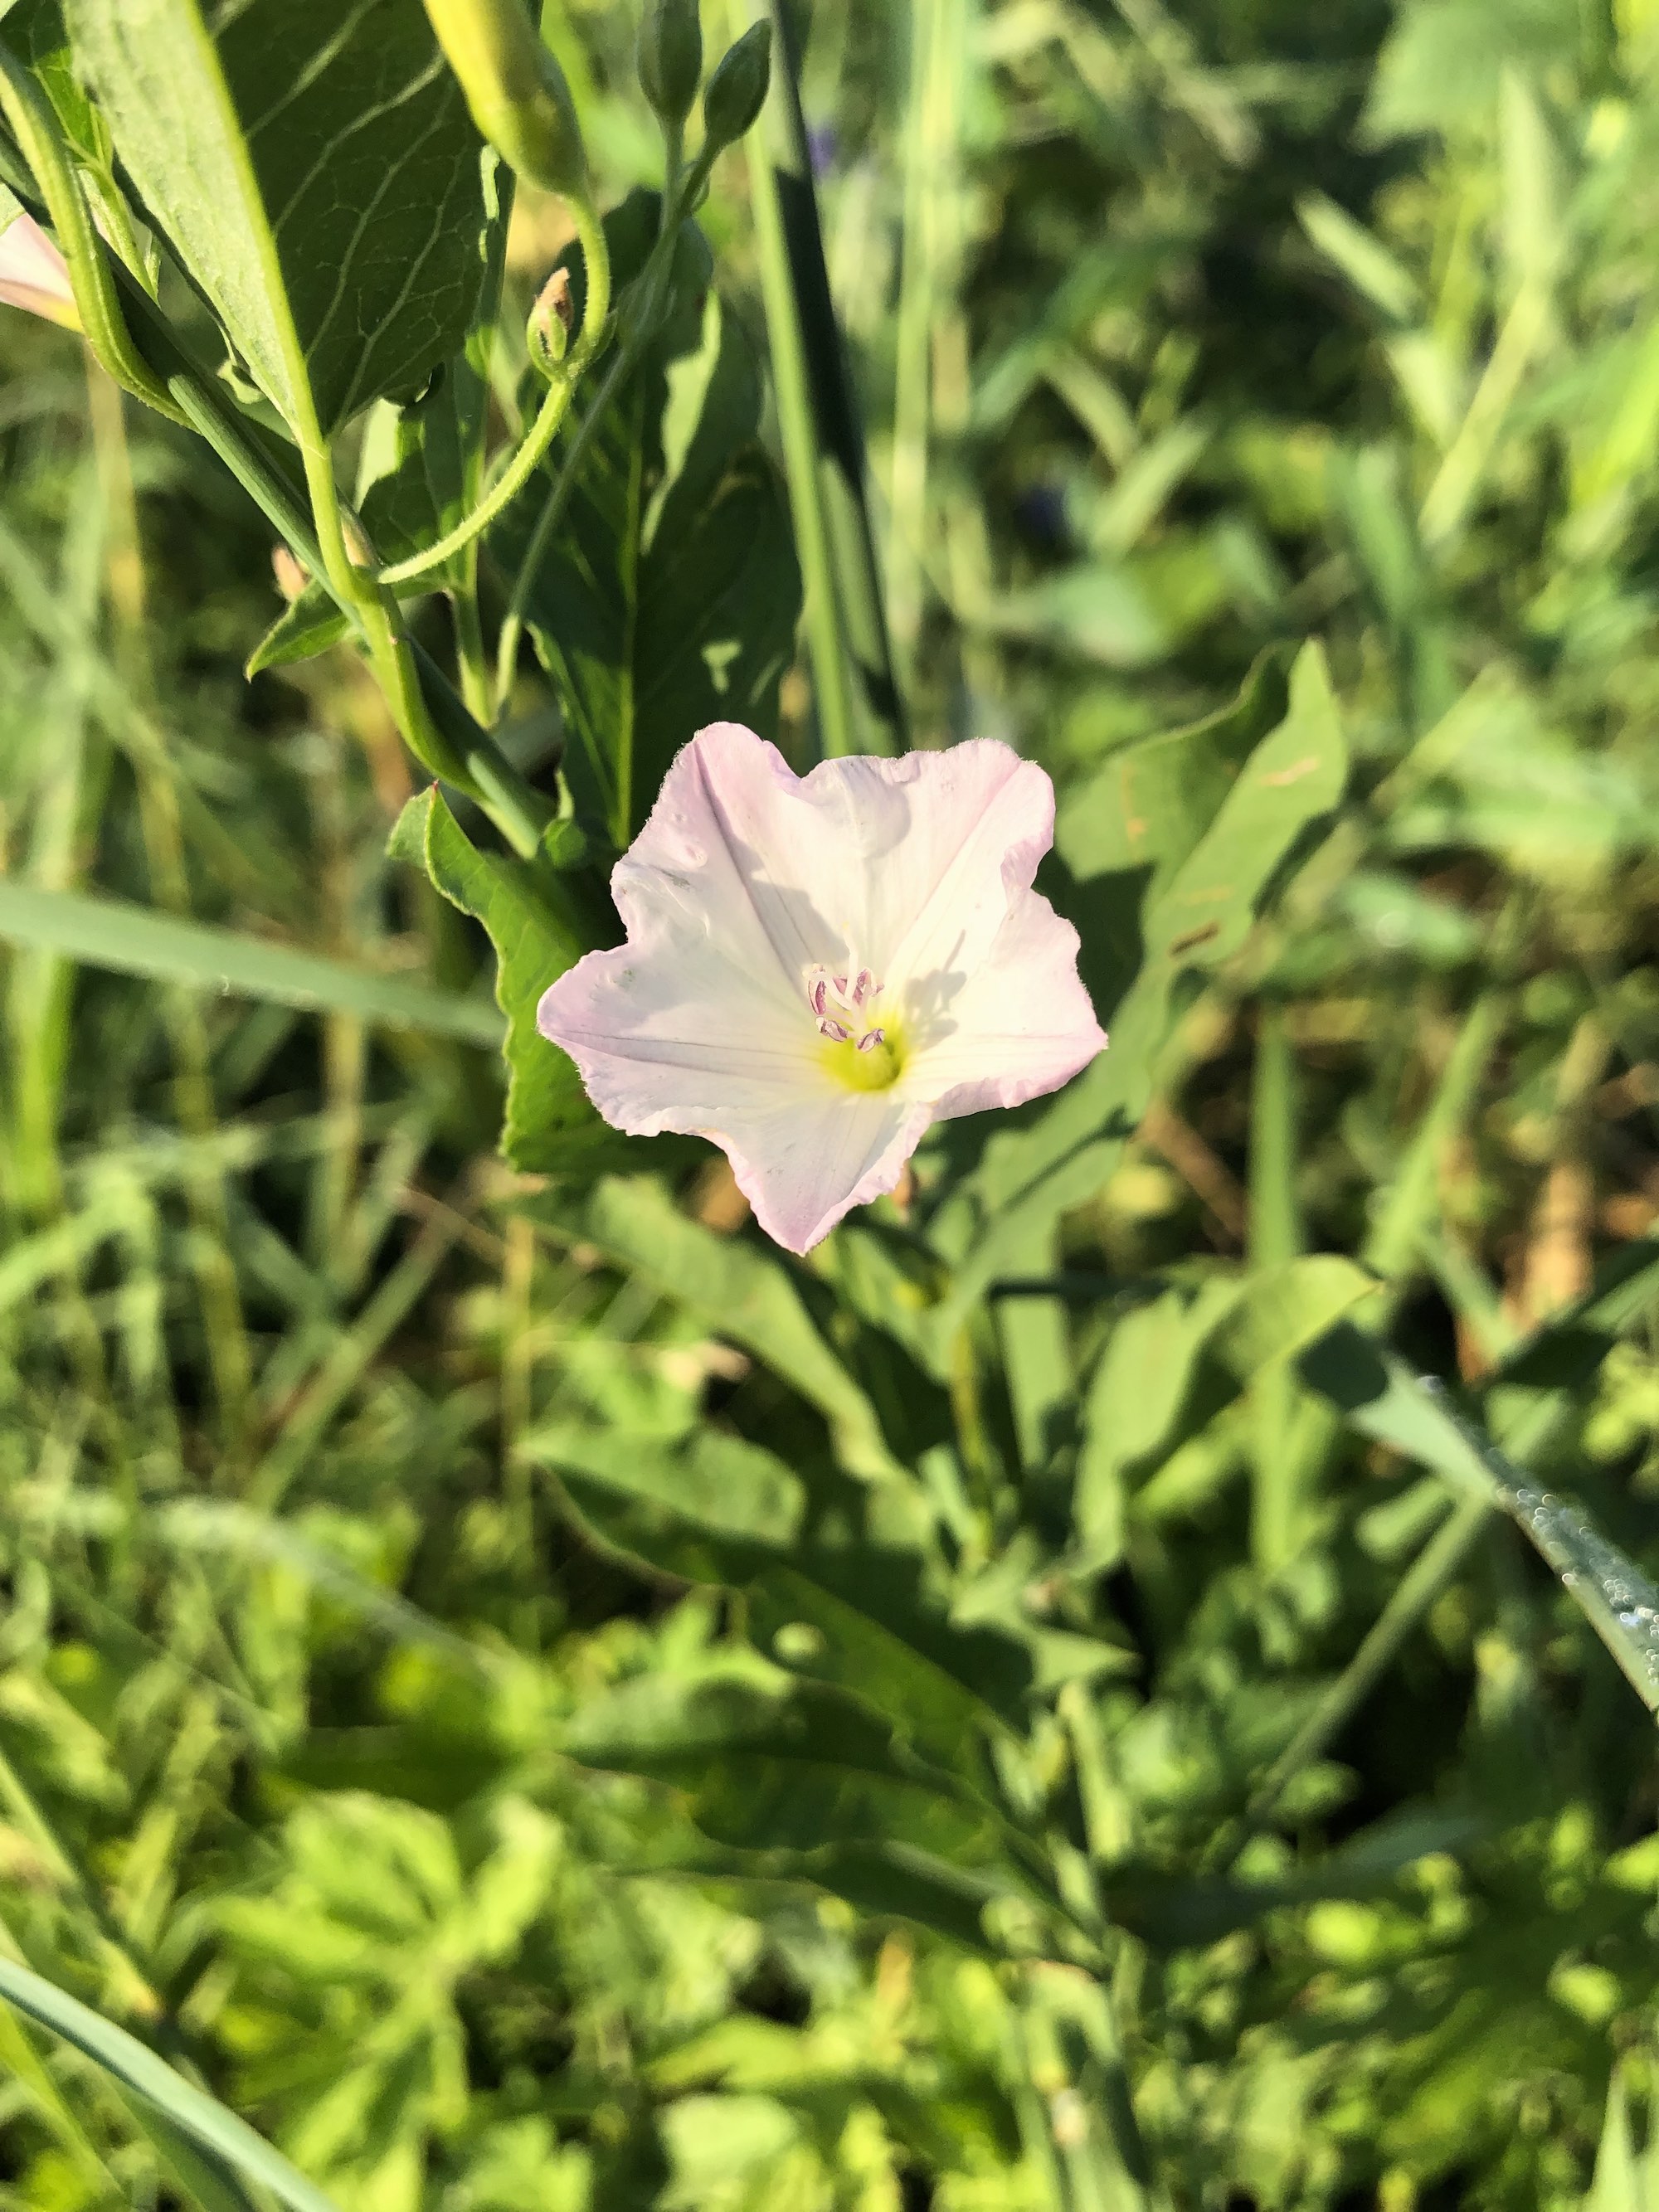 Field Bindweed on shore of Marion Dunn Pond in Madison, Wisconsin on June 12, 2021.